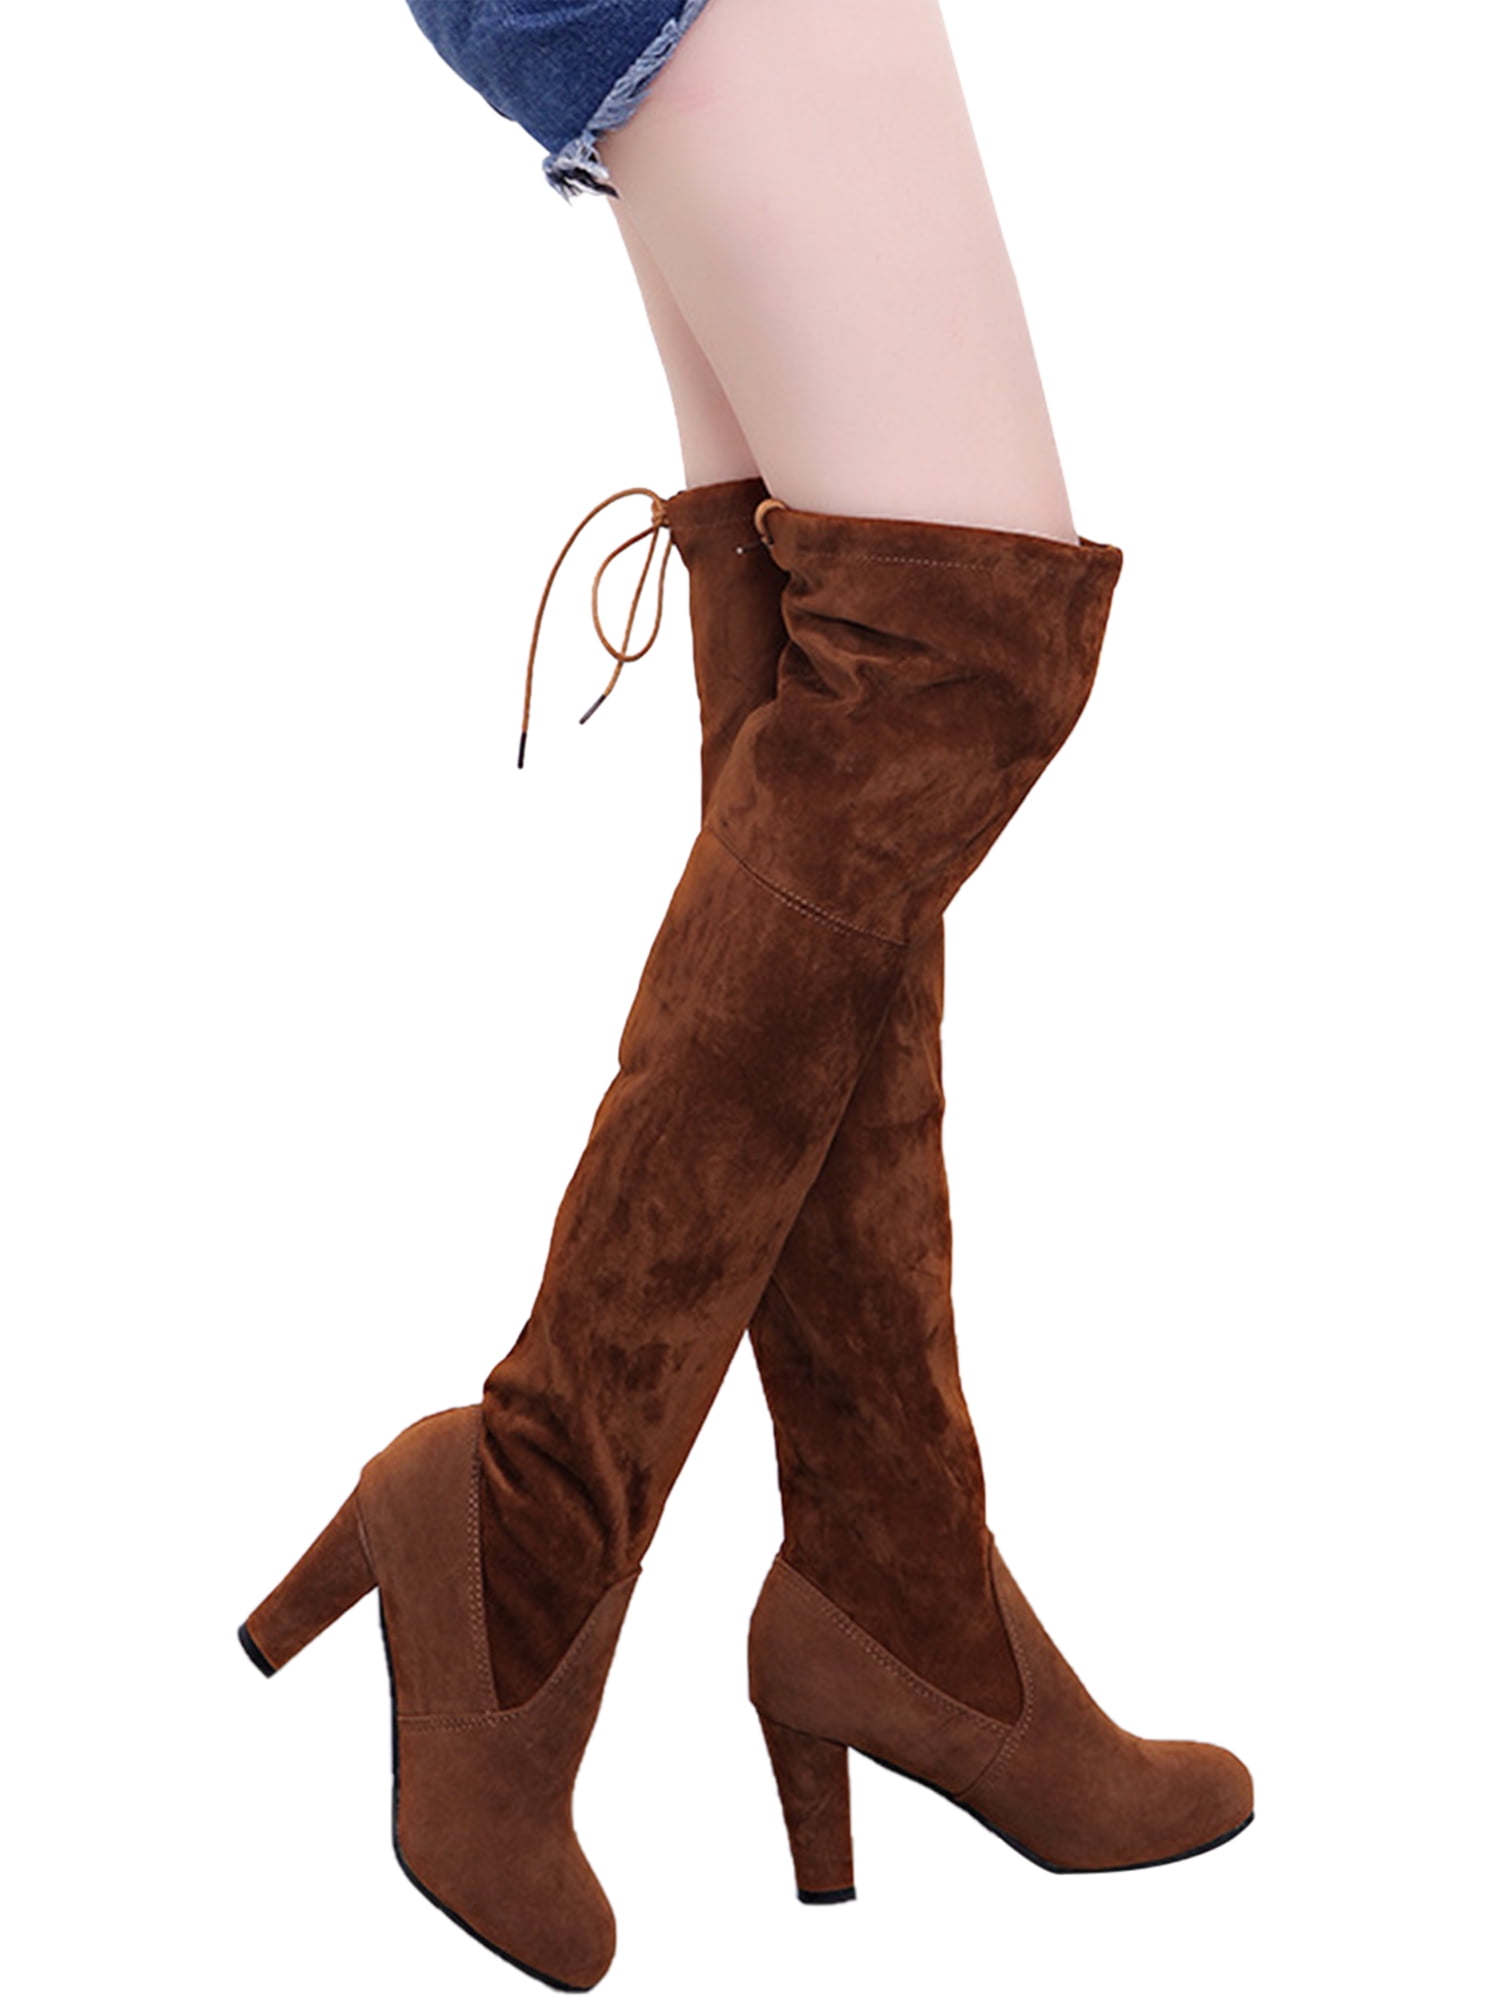 US 4-13 Women Ladies Lace Up Block Heel Over Knee High Boots Party Suede Shoes